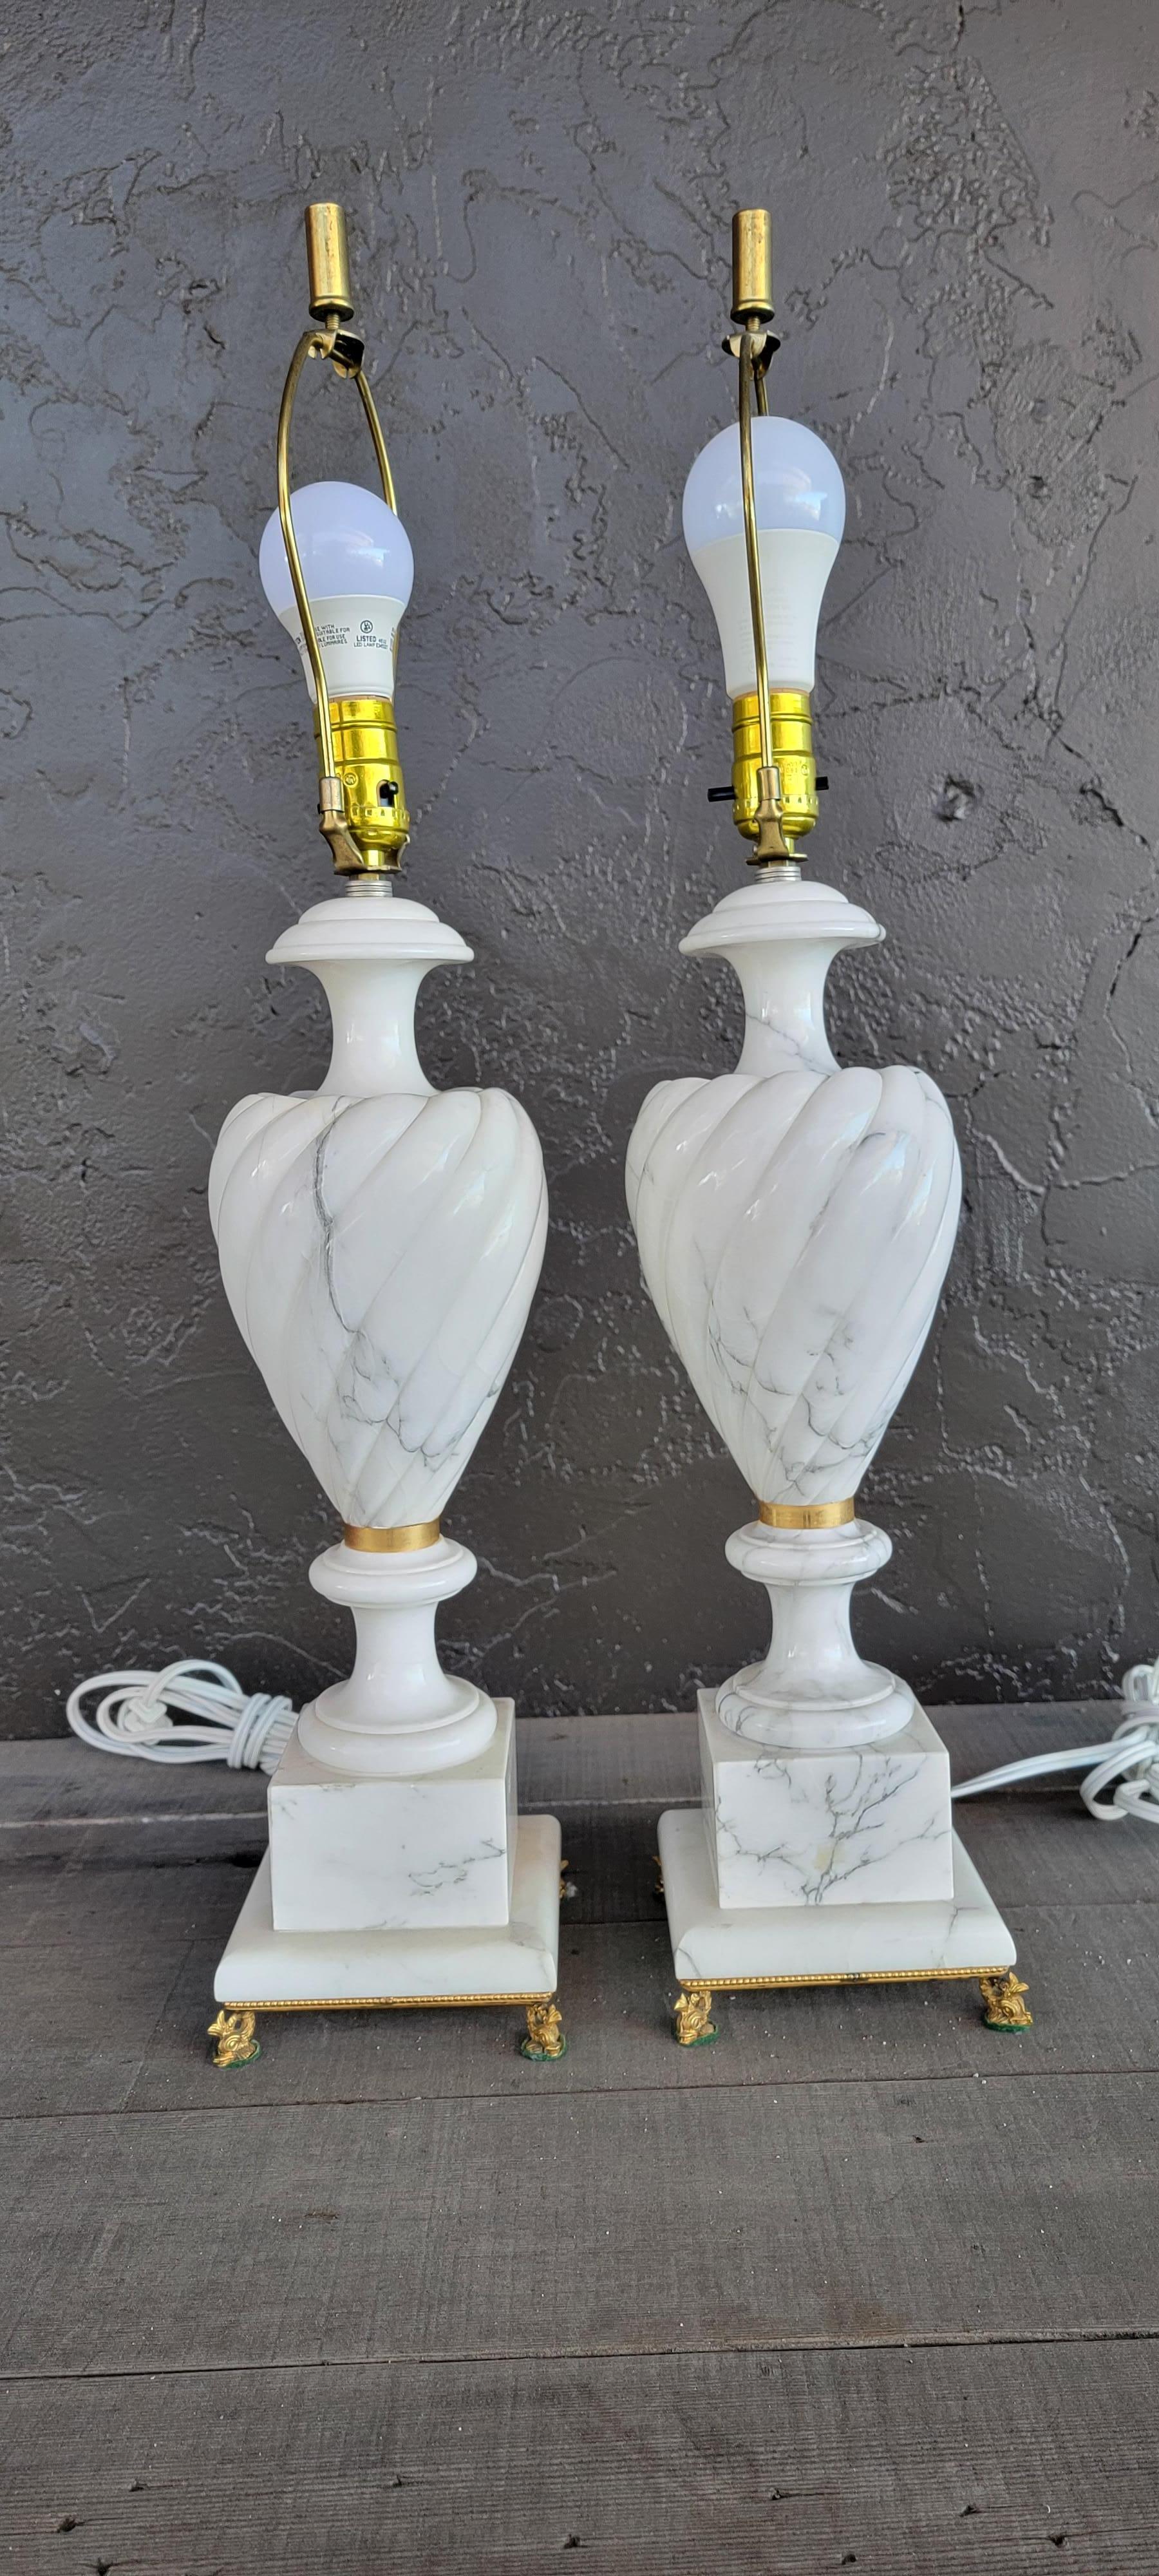 A pair of alabaster table lamps mounted to gilt brass dolphin bases. Black and white marbleized alabaster. Measure 28.25 inches to top of finial. Base measures 5.5 inches square.